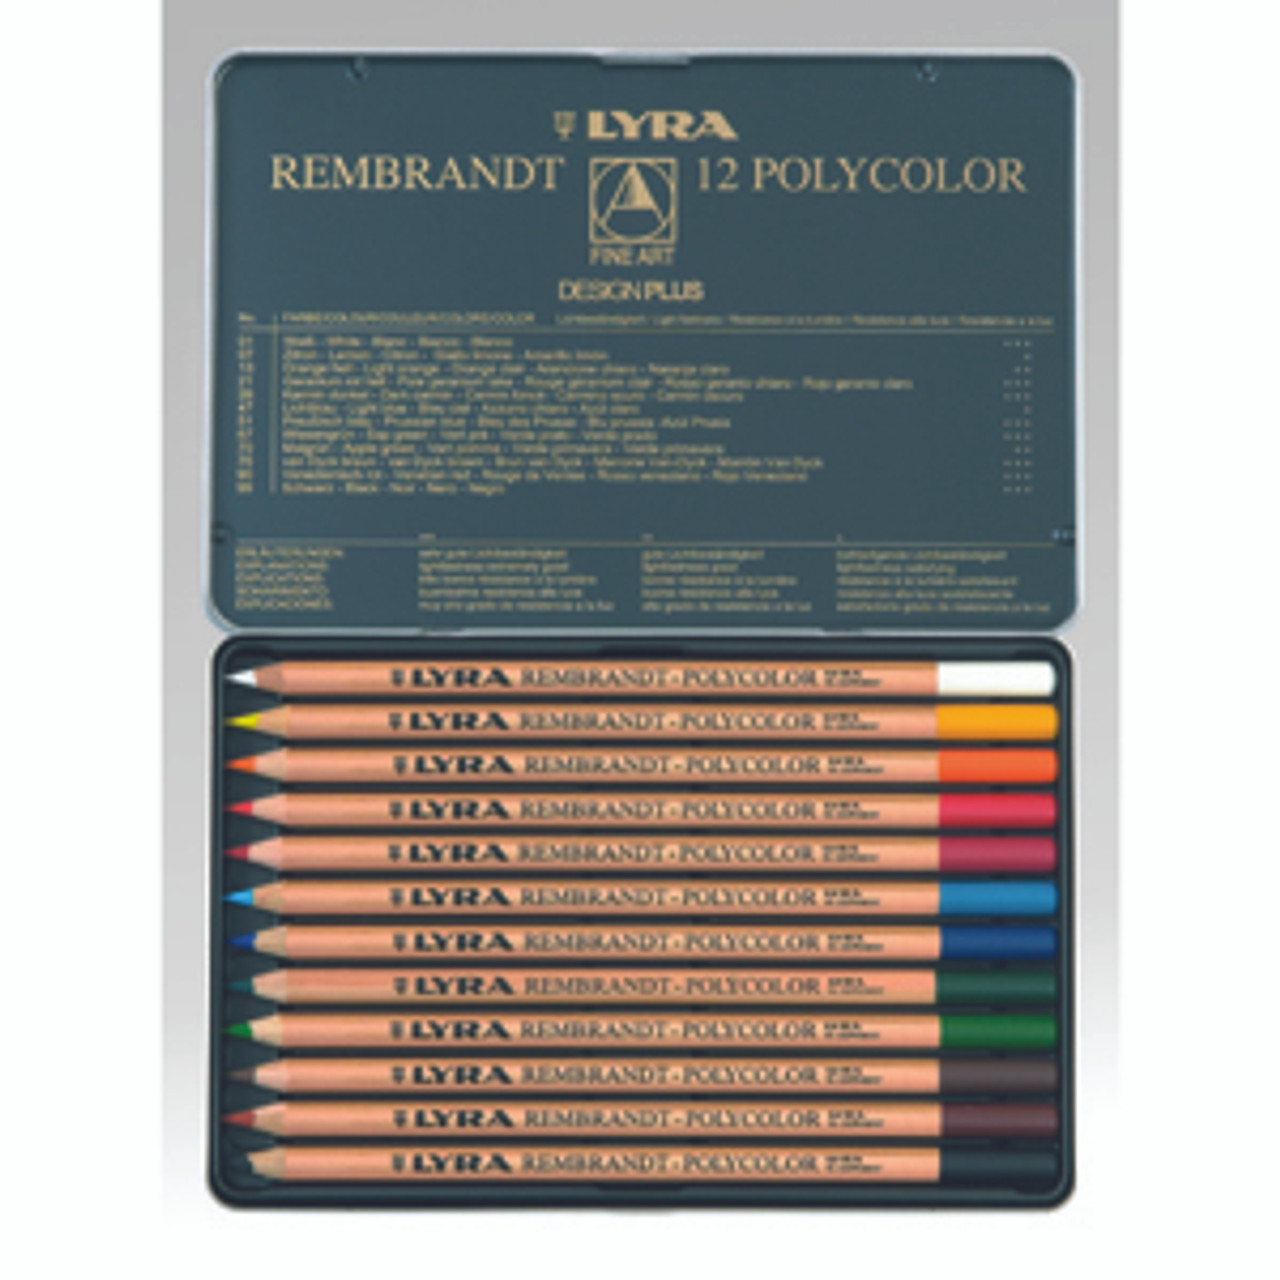 LYRA Rembrandt Polycolor Pencils Set of 12 Assorted Colors for